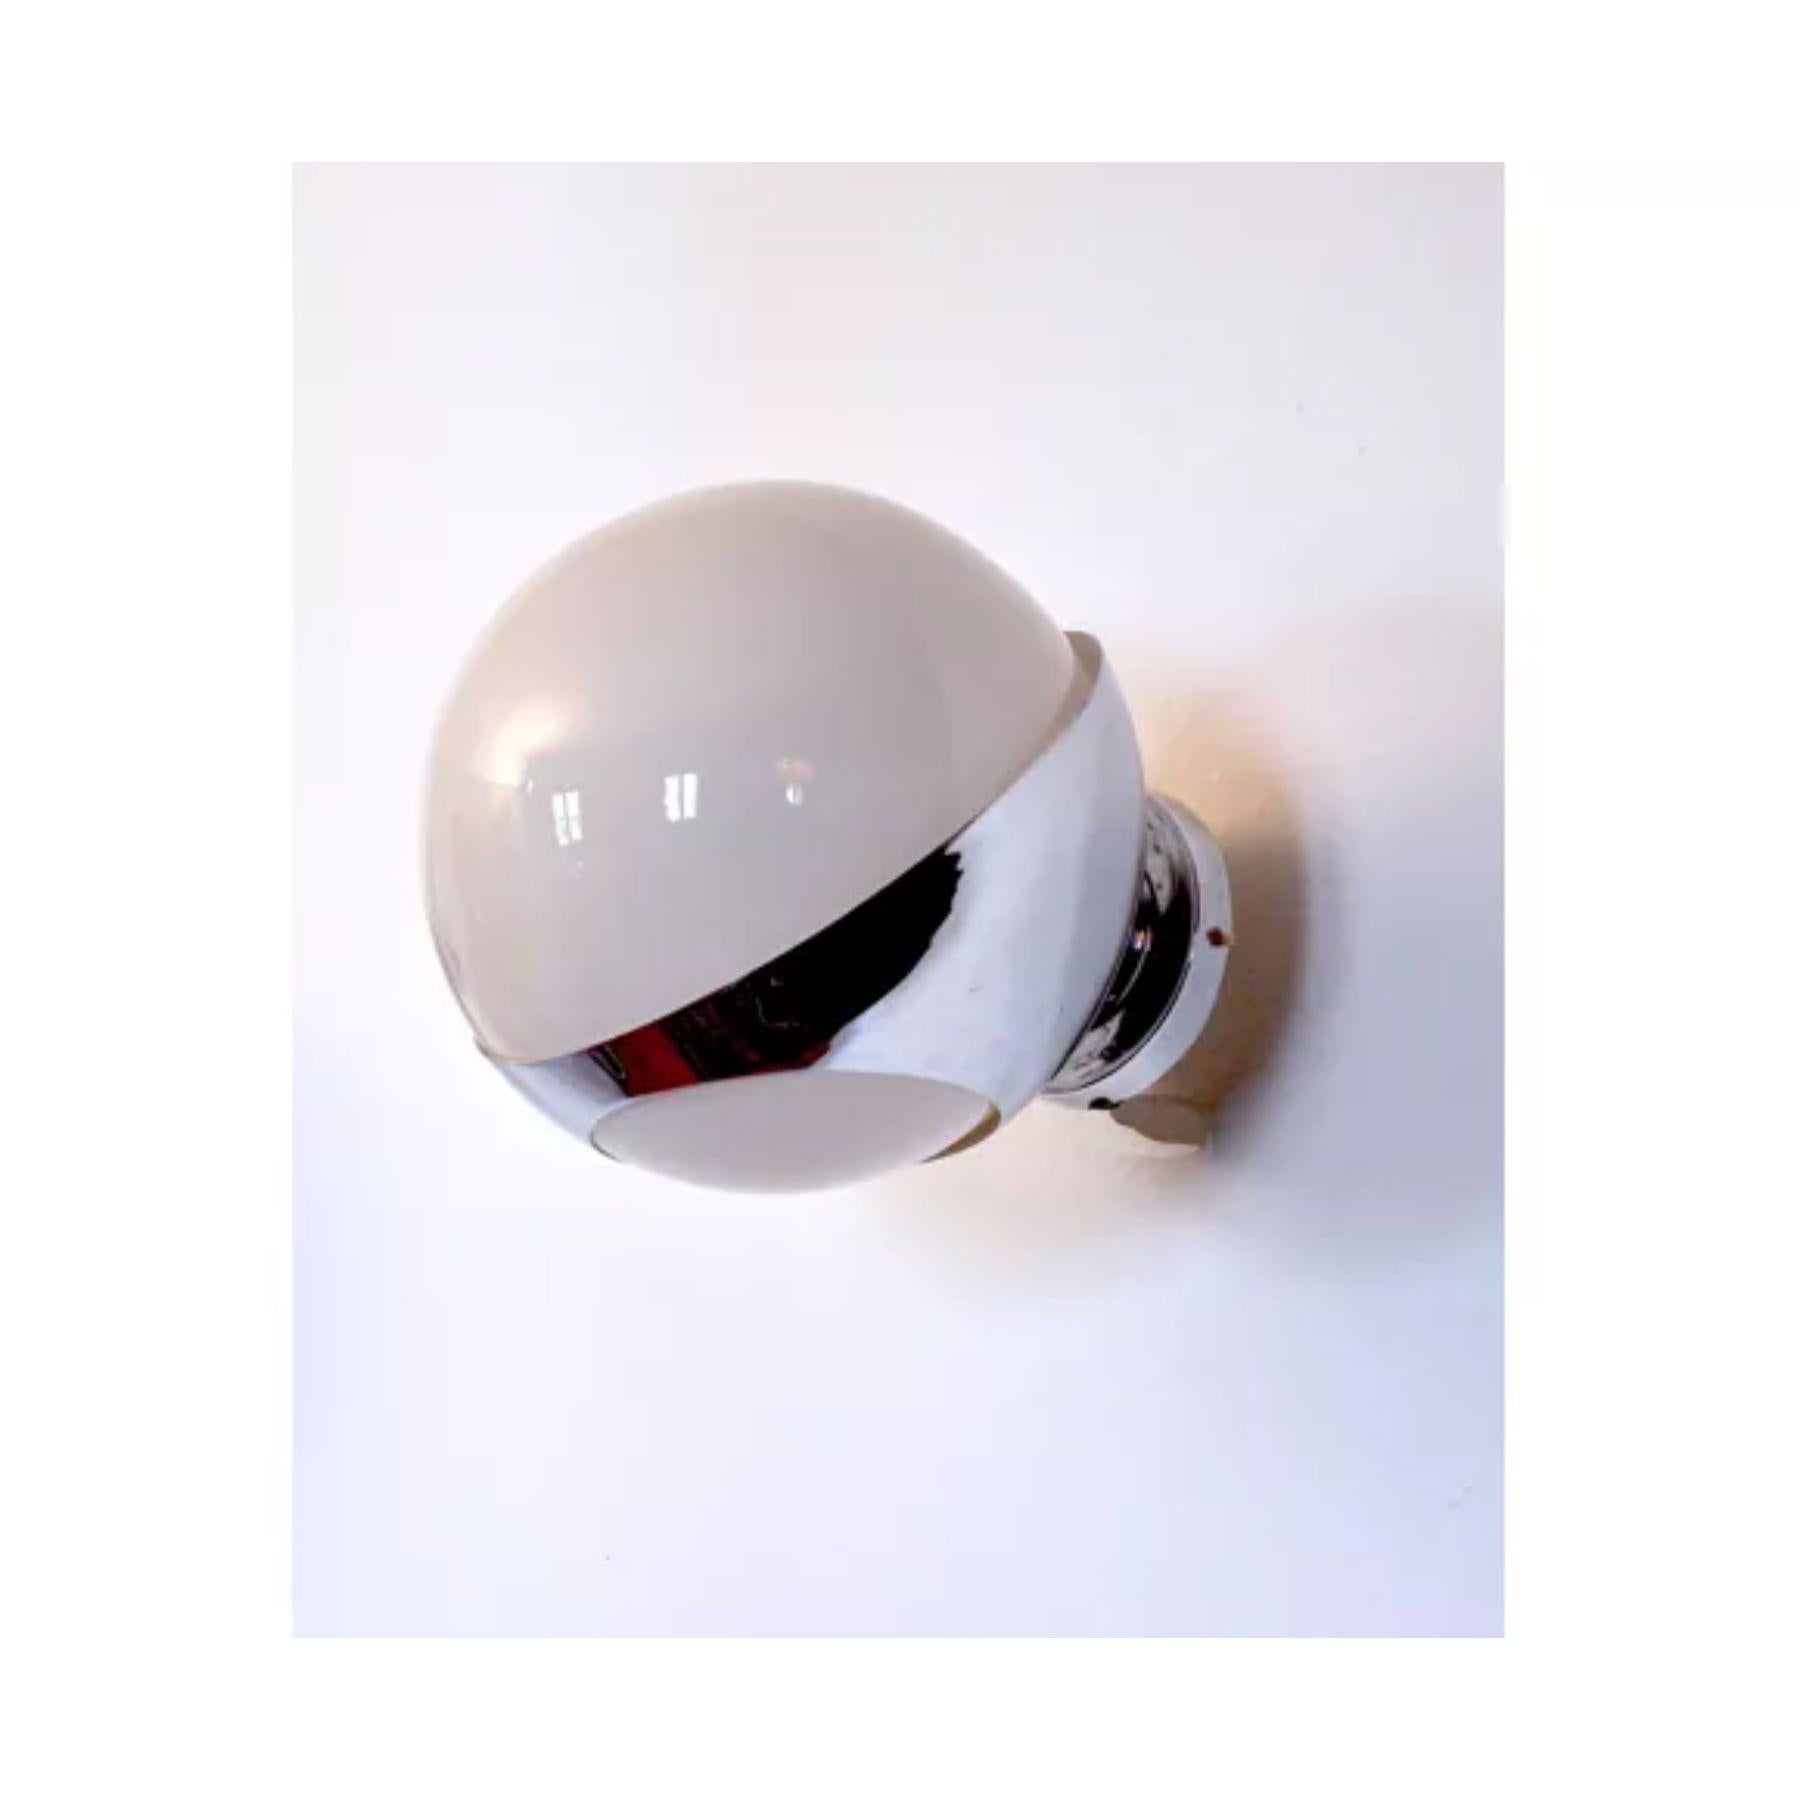 Large wall lamp made in italy in the 1960s. White opaline glass sphere inserted in a chromed aluminum support fixed to the wall. Retro-futuristic design reminiscent of the 